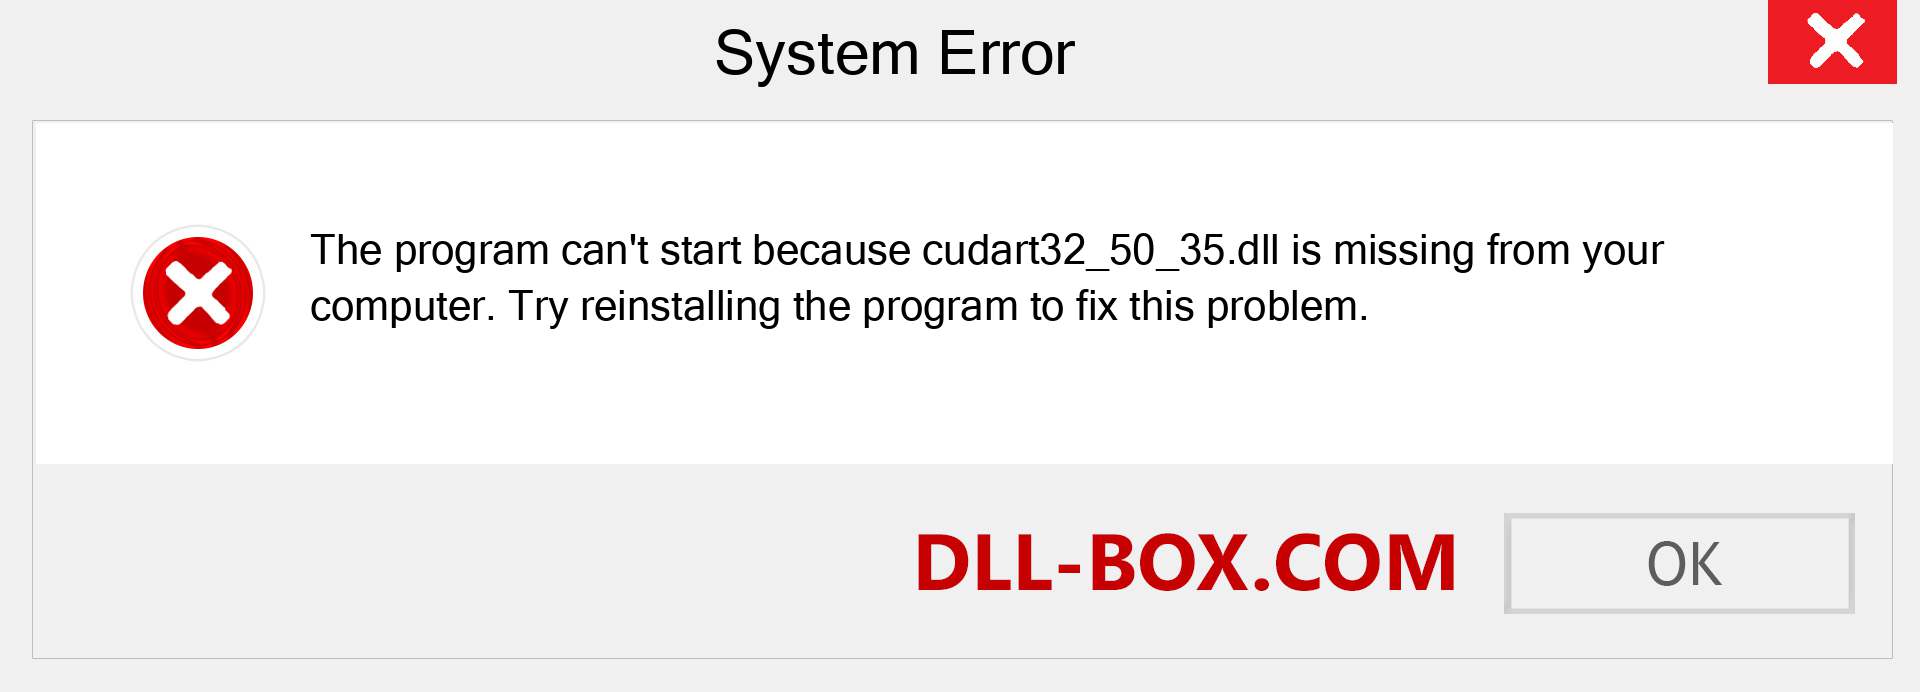  cudart32_50_35.dll file is missing?. Download for Windows 7, 8, 10 - Fix  cudart32_50_35 dll Missing Error on Windows, photos, images